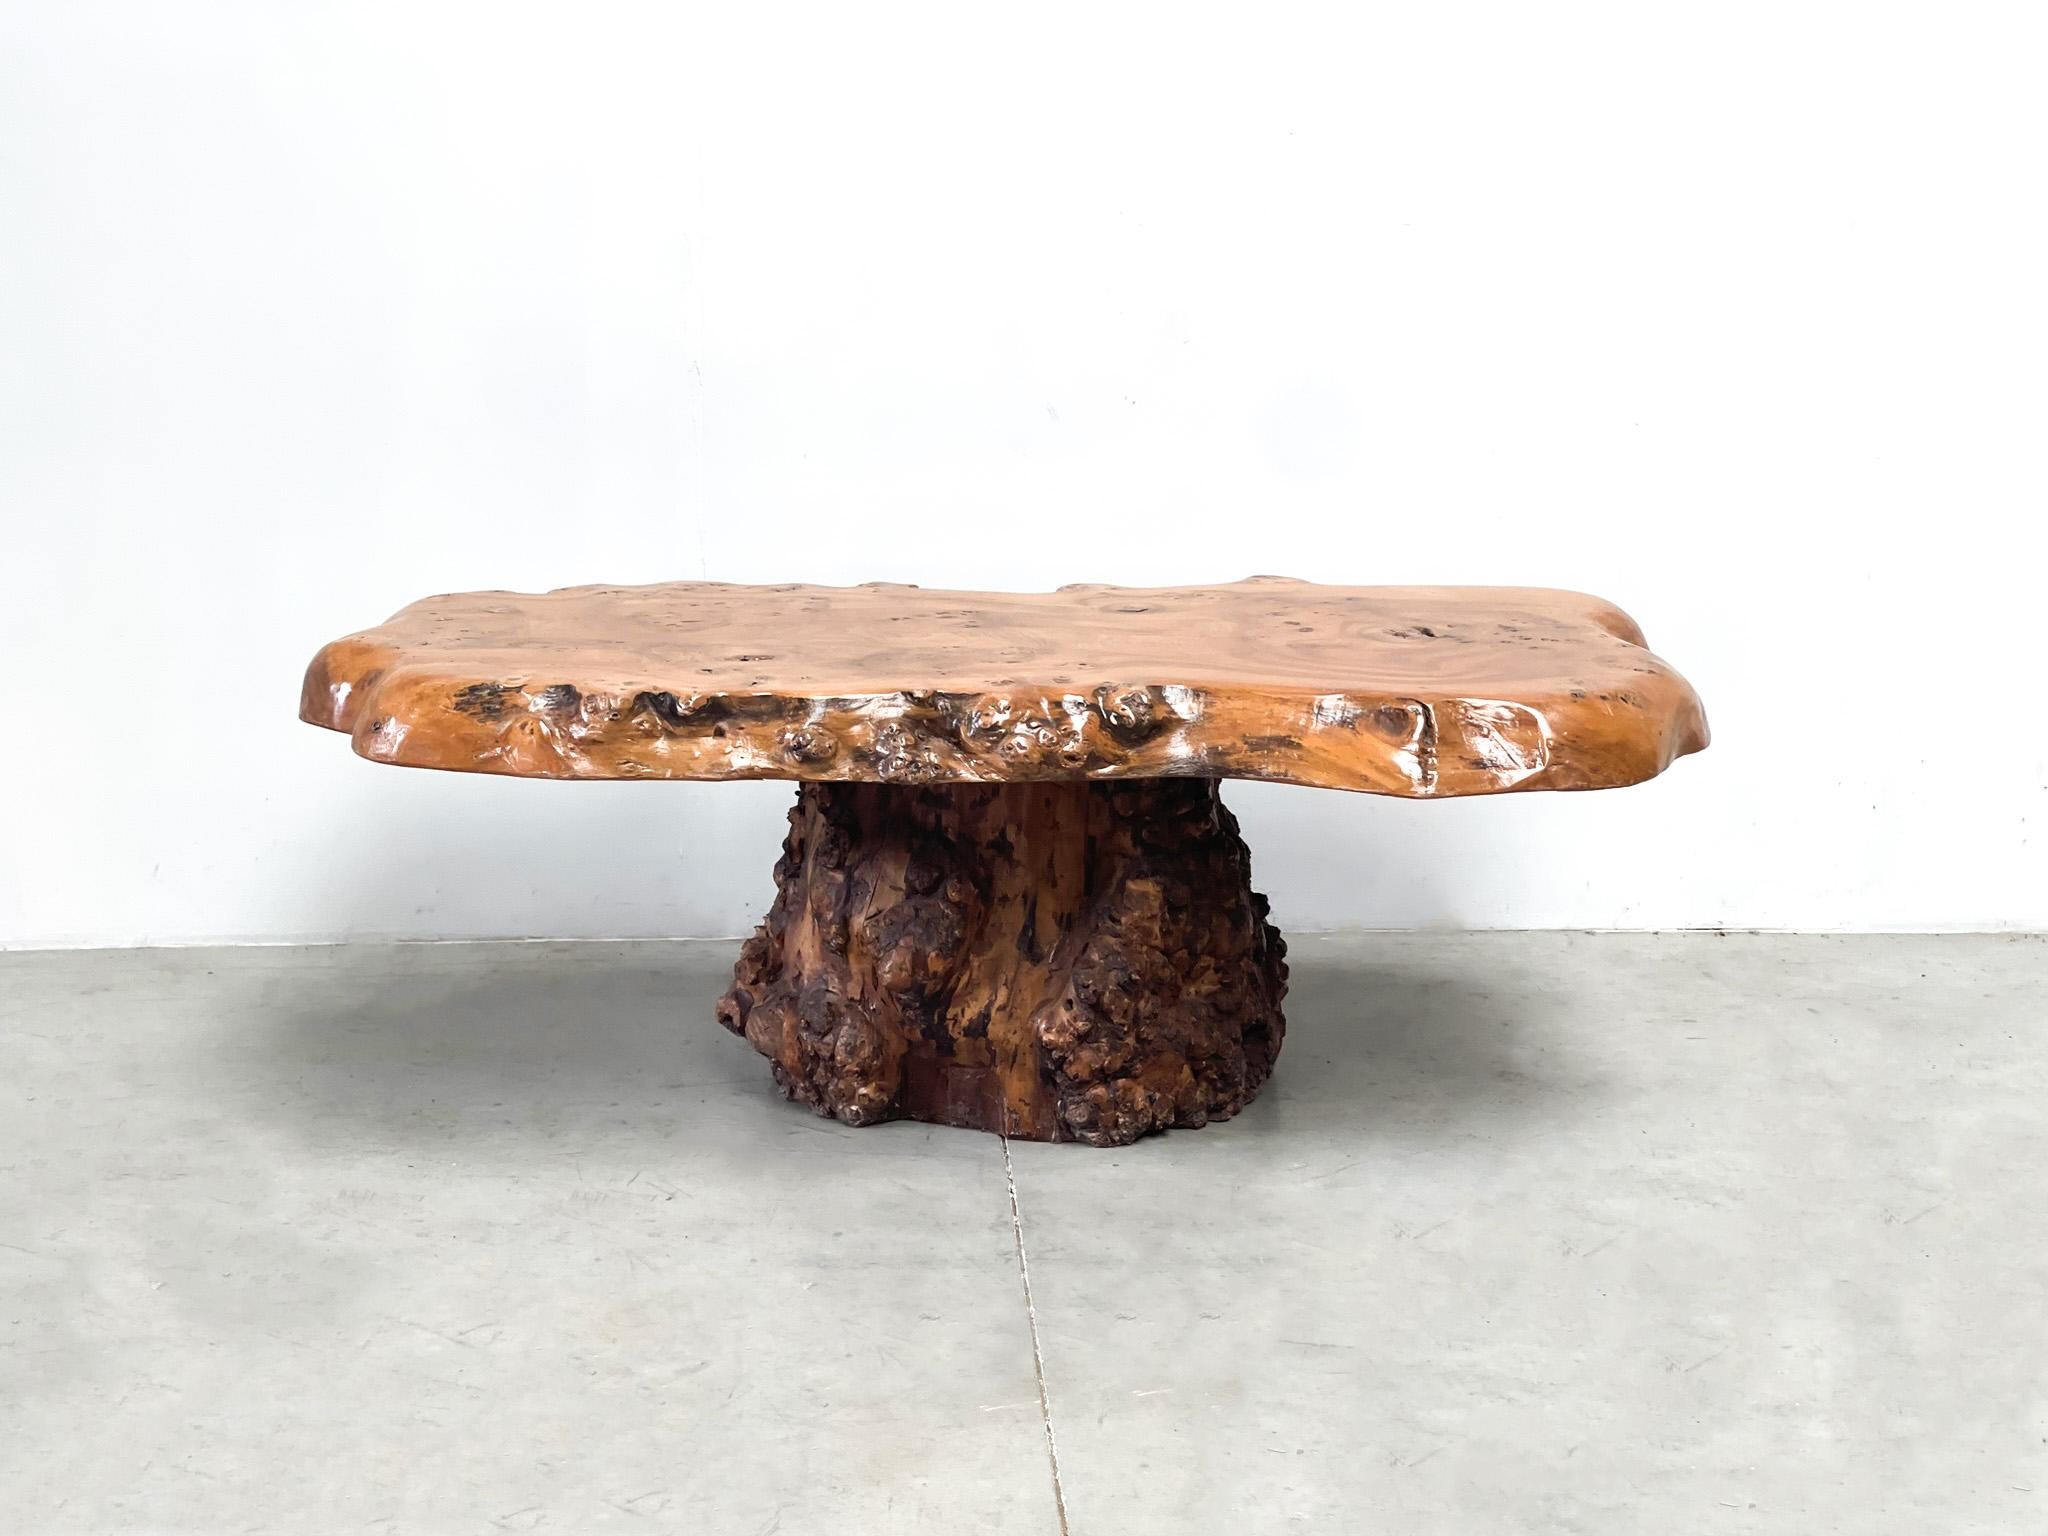 Design in its purest form. A brutalist oak coffee table made in the 80s. The wood has acquired a very nice patina over the years. These tables are becoming more sought afhter over the years. It is made out of a oak tree!